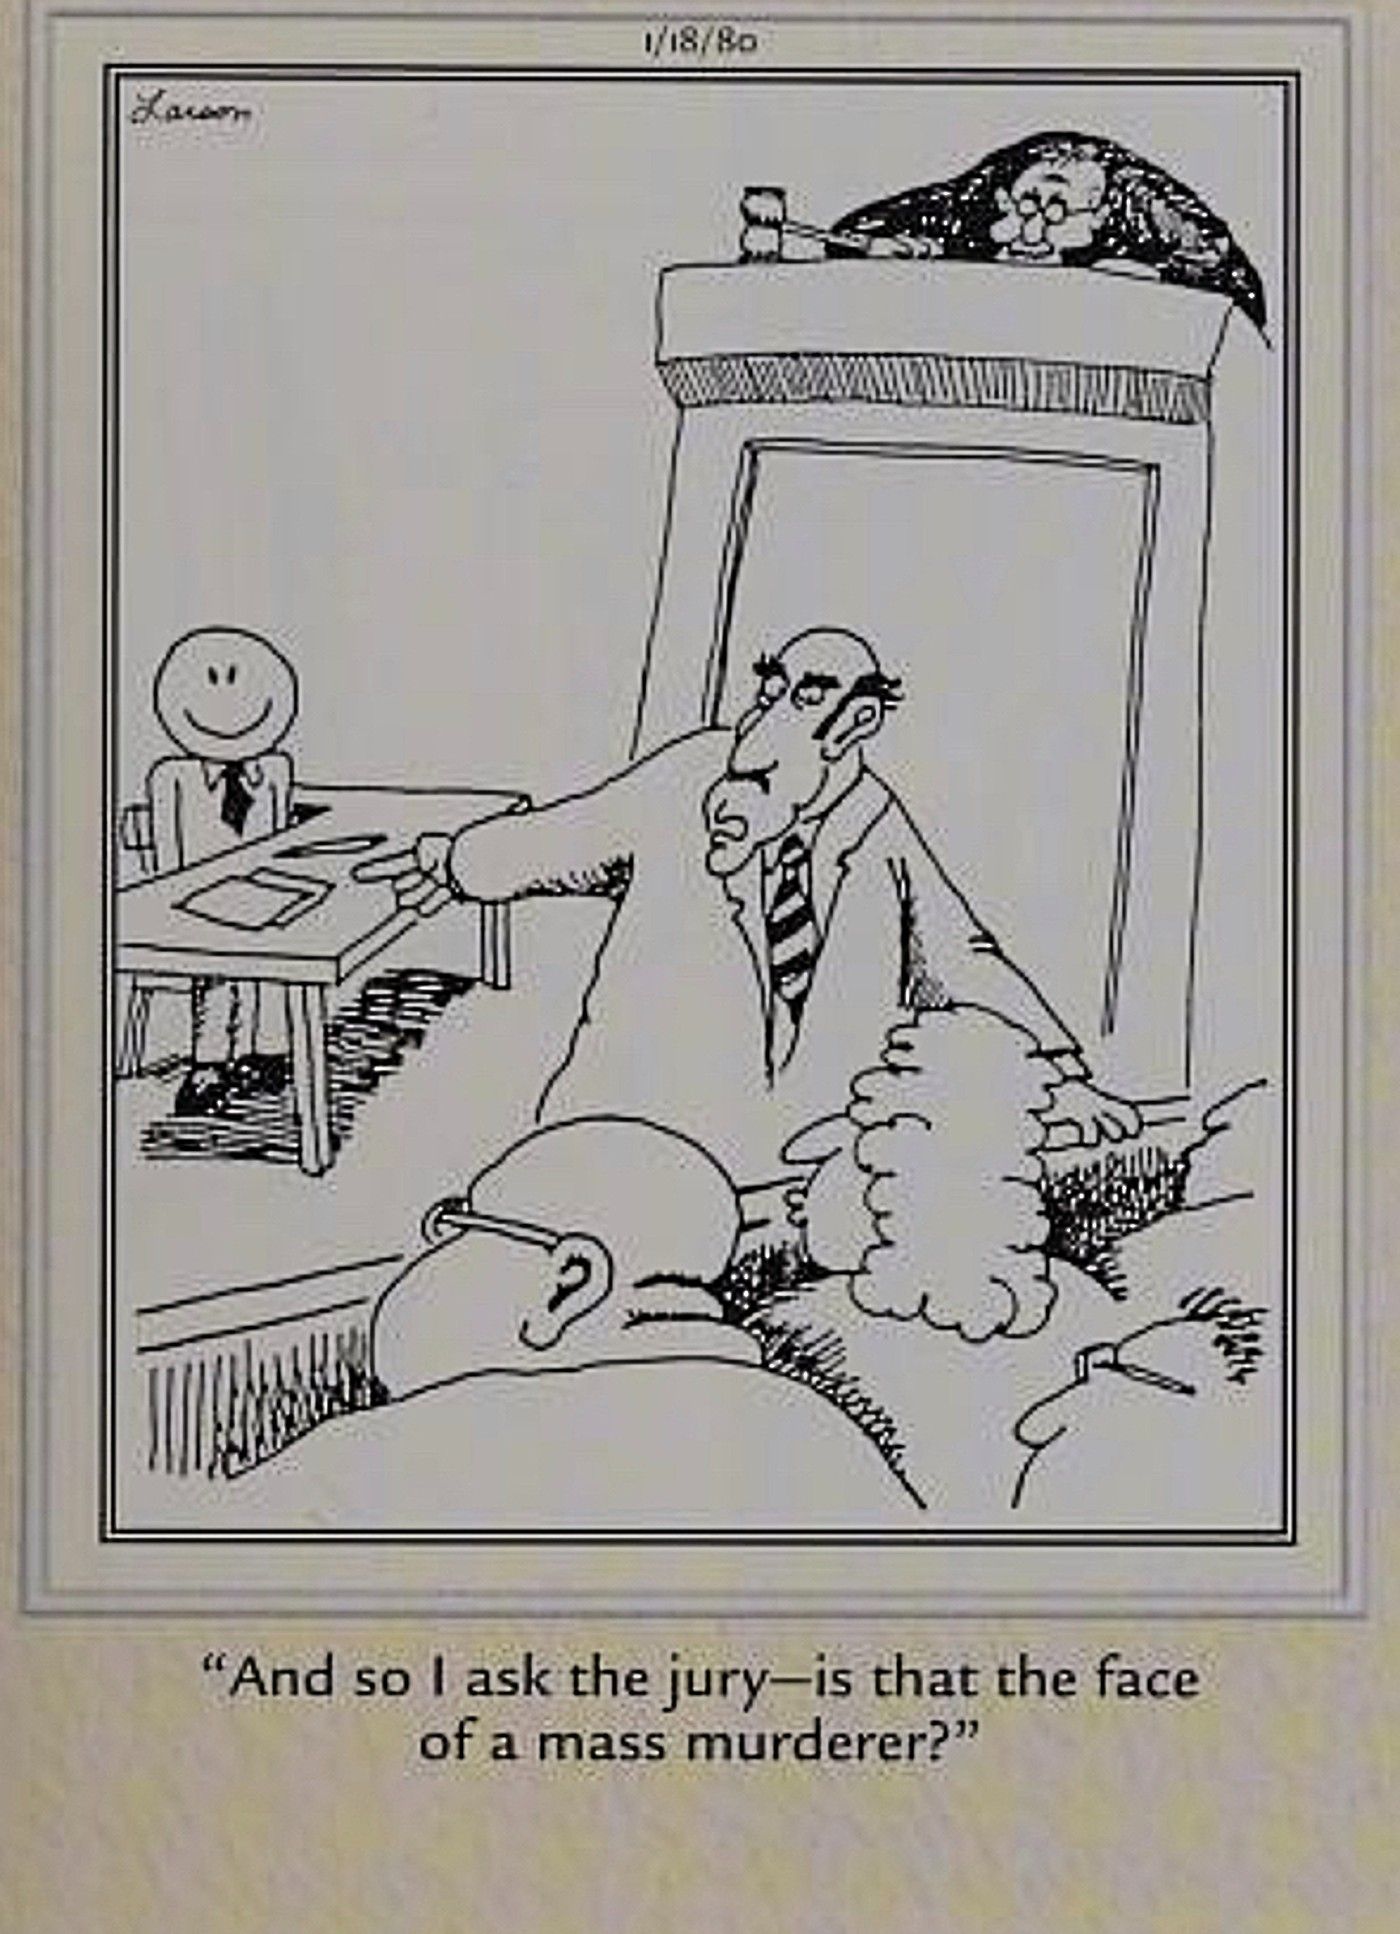 Far Side, defense lawyer asks if his client, a smiley face, looks like a mass murderer